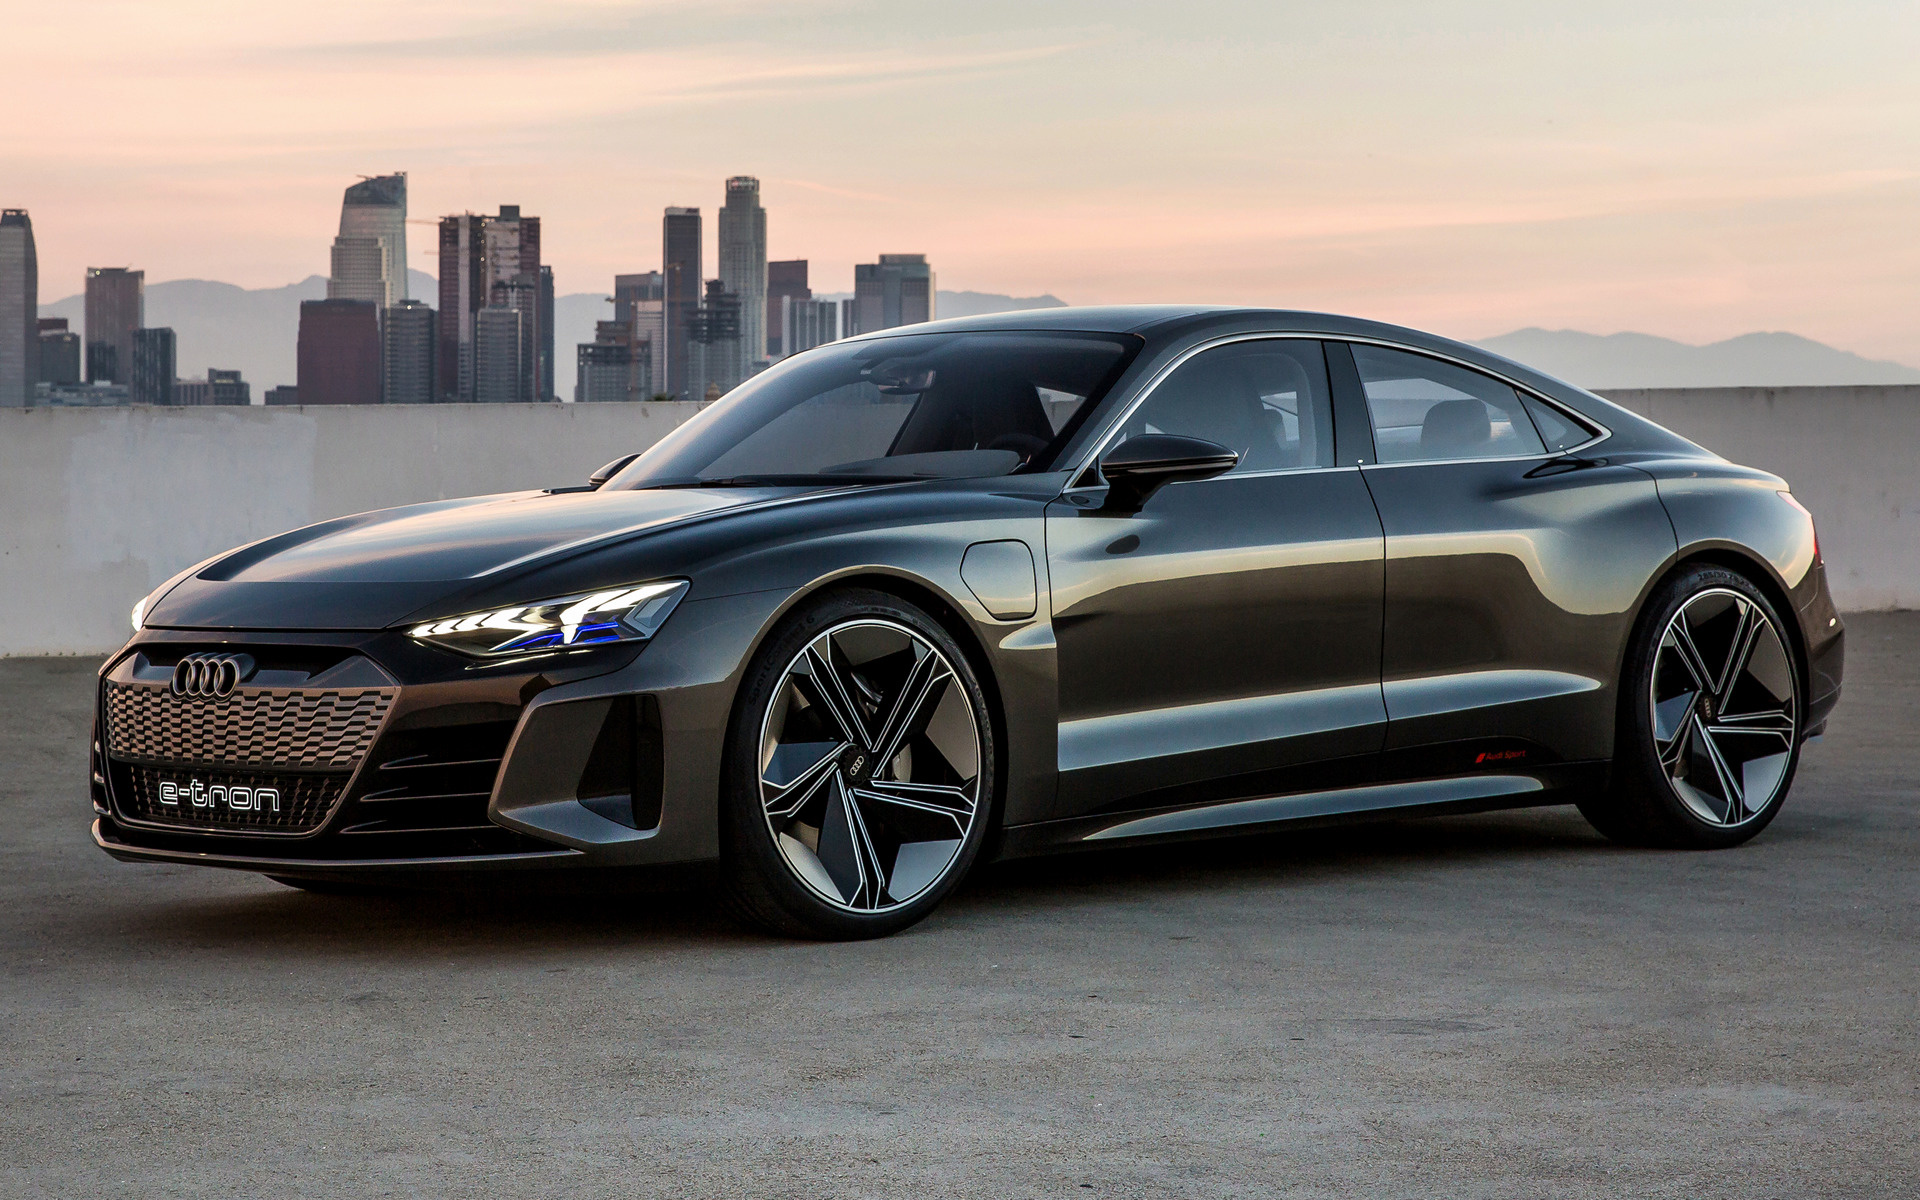 2018 Audi E-Tron GT concept - Wallpapers and HD Images | Car Pixel